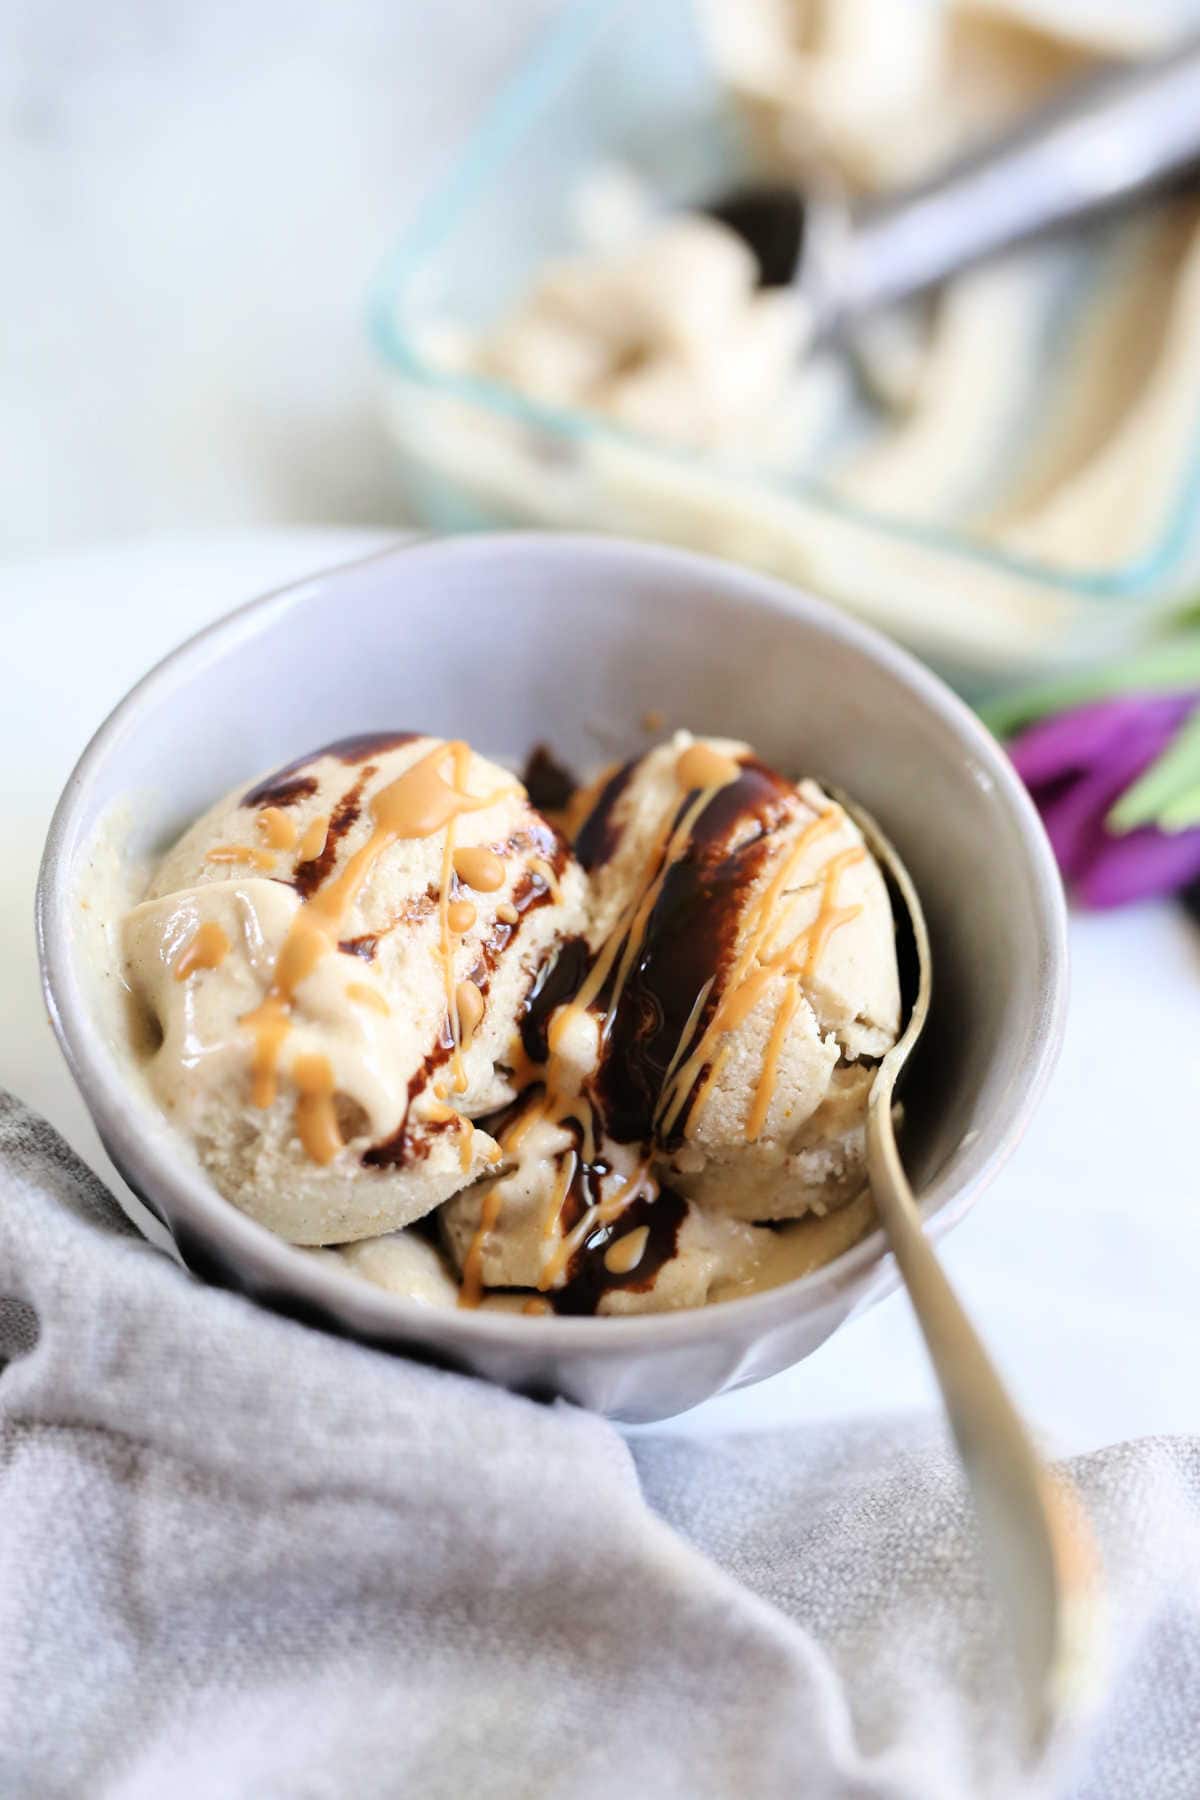 Vegan Banana Ice Cream Topped with Chocolate and Peanut Butter in a Bowl with a Spoon